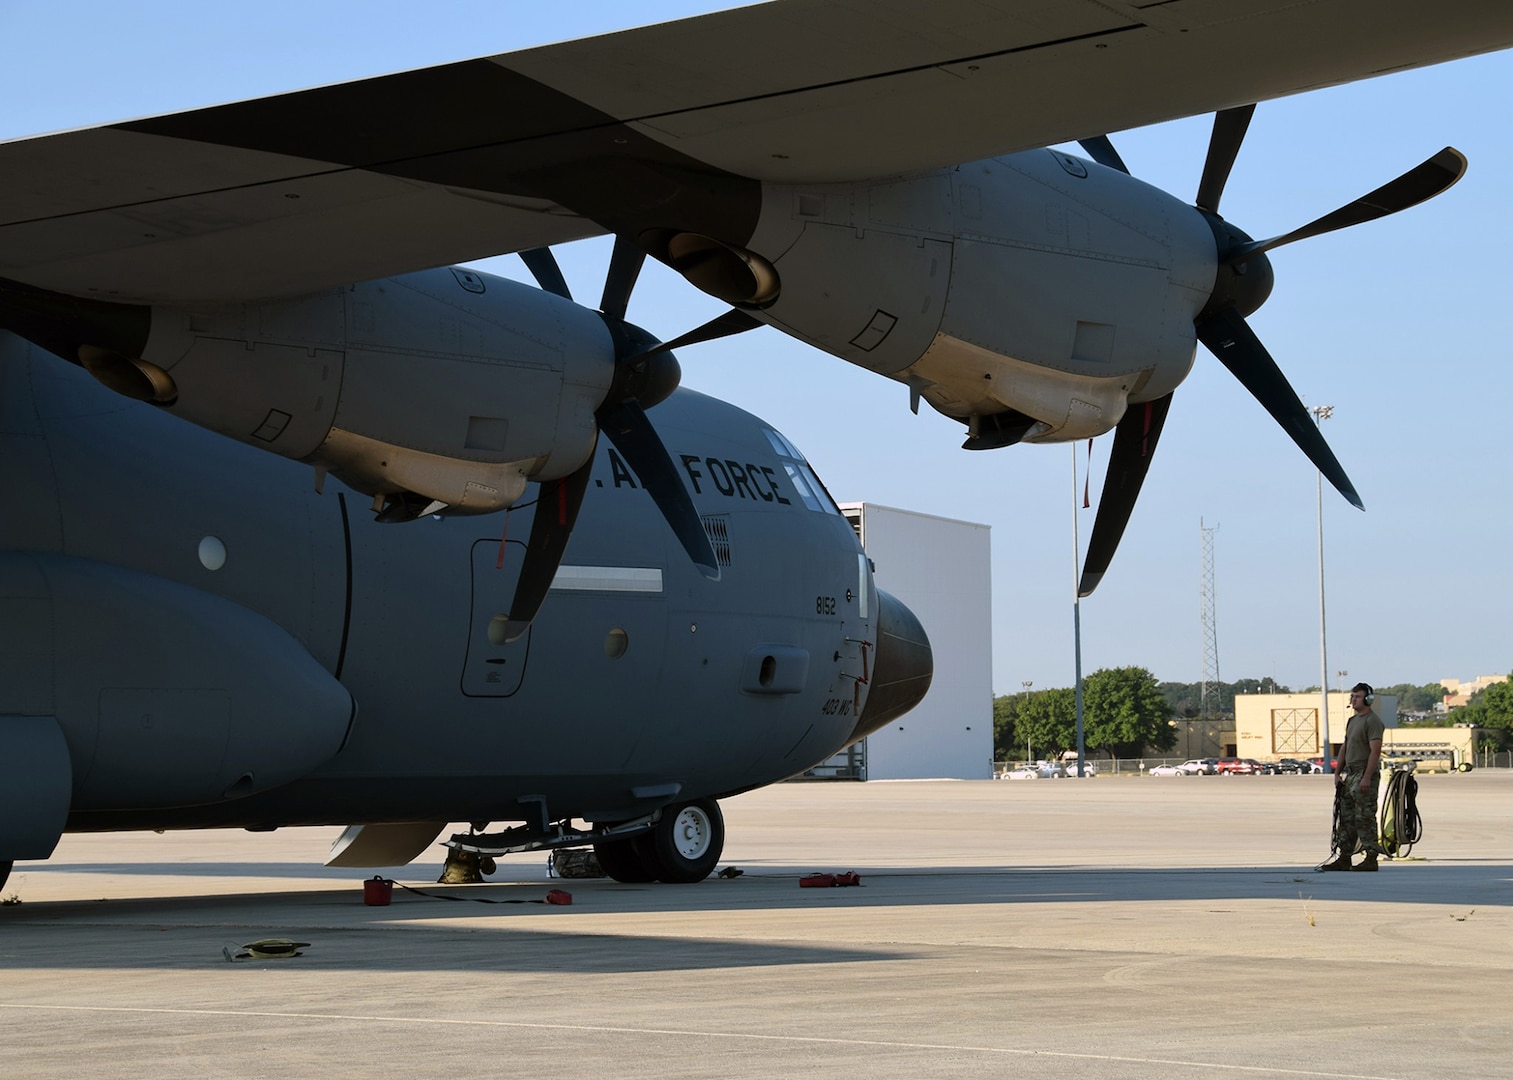 Staff Sgt. Zachary Faith, 403rd Aircraft Maintenance Squadron crew chief, performs a pre-flight check on a C-130J Hercules cargo aircraft Aug. 25 at Joint Base San Antonio-Lackland. Eight C-130Js evacuated from Keesler Air Force Base, Mississippi, to avoid damage from Hurricane Marco and Tropical Storm Laura.